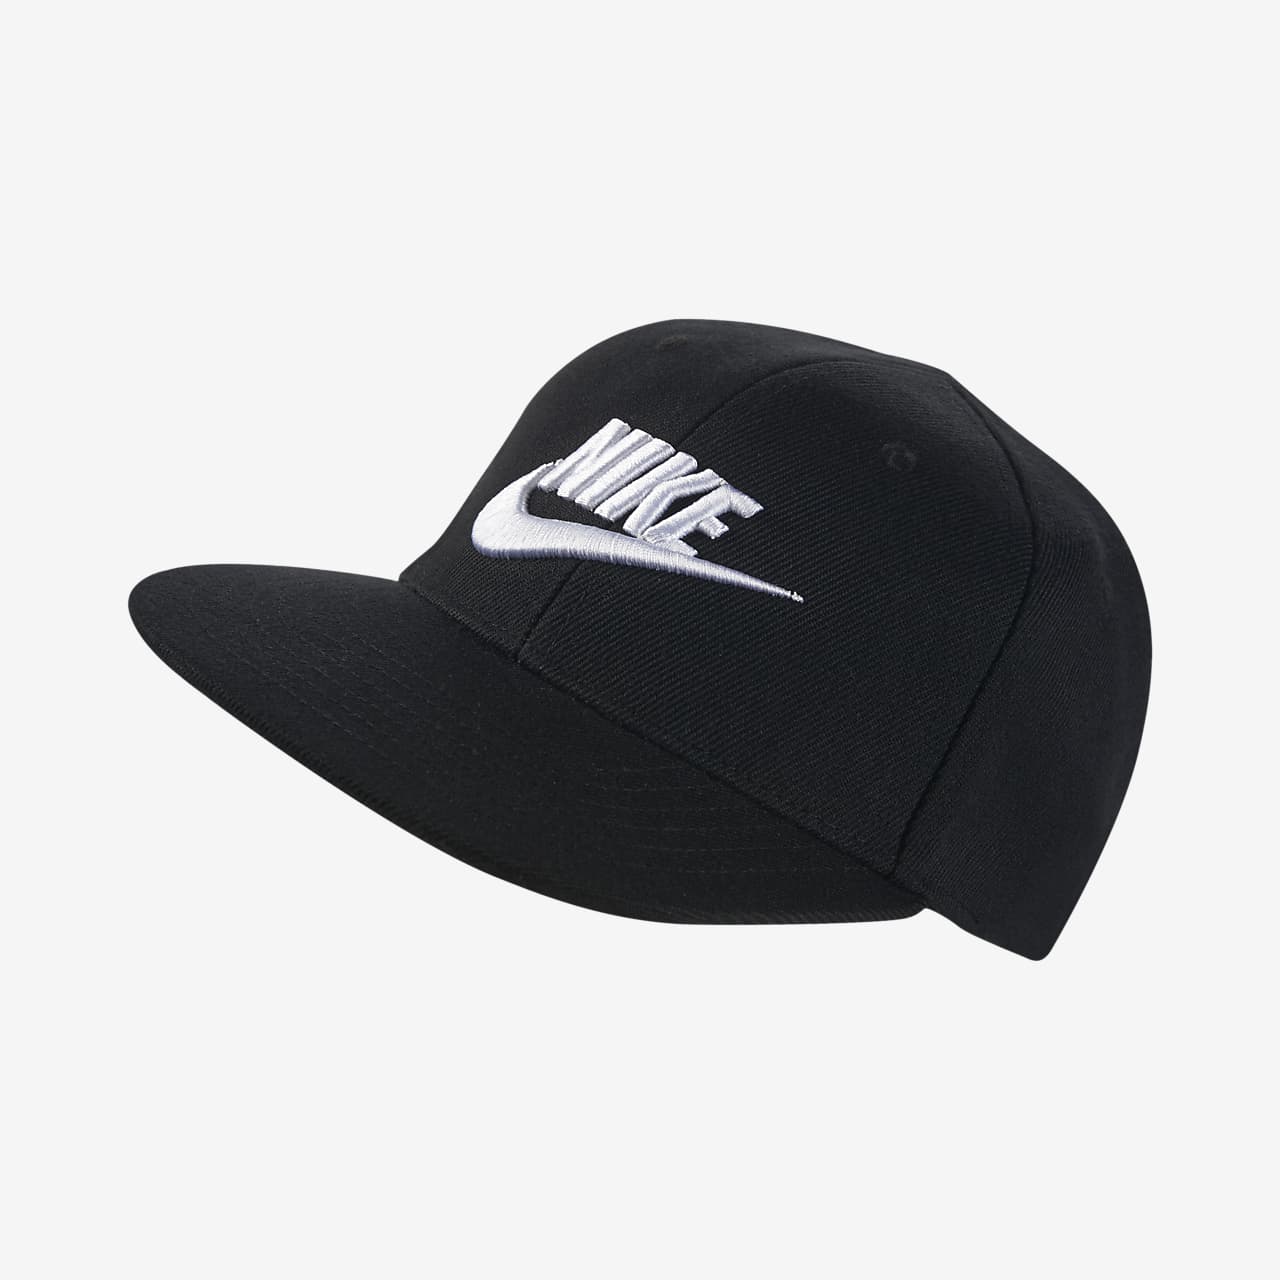 nike hat red and black